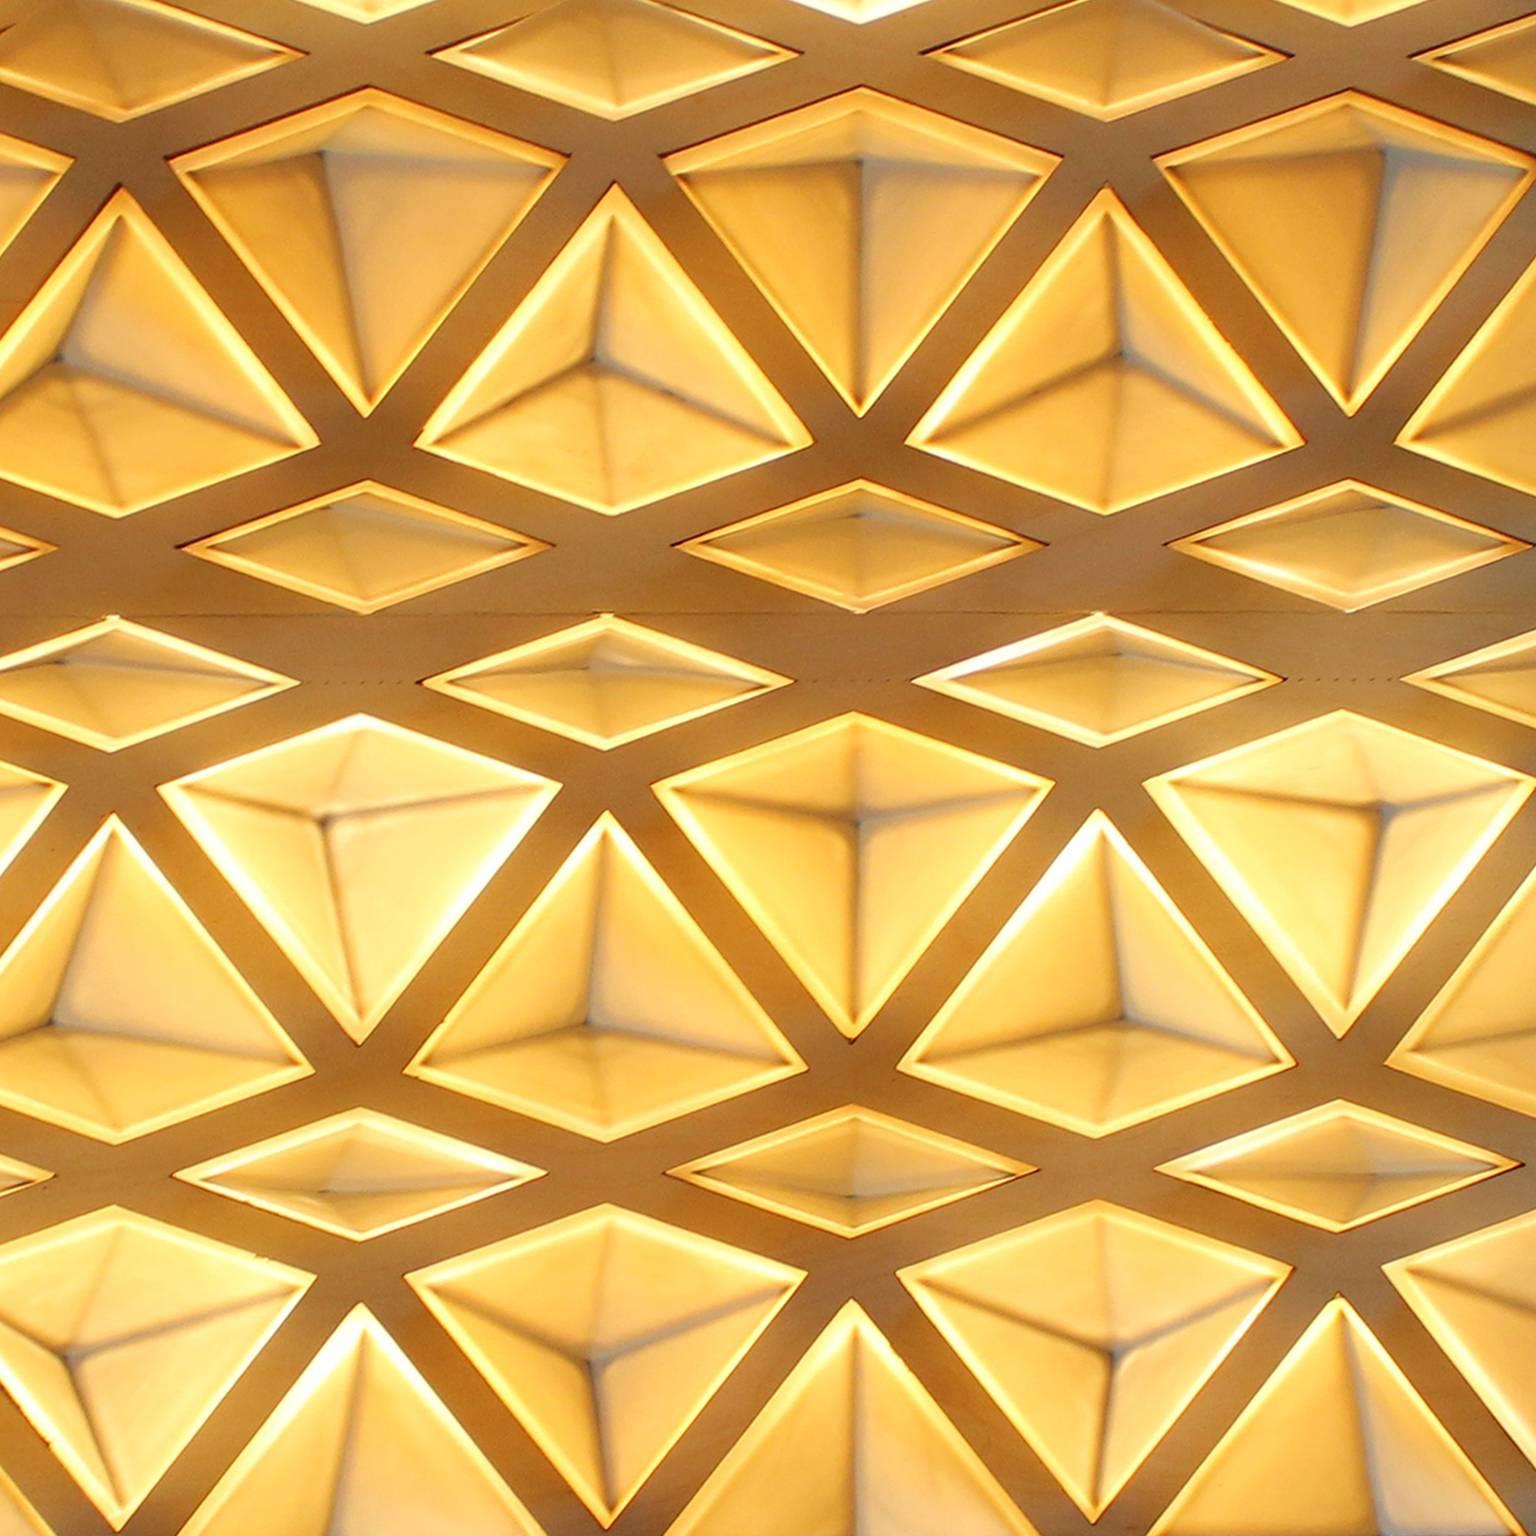 Wall tile installation
-Our tessellating light tiles are one of our most ambitious projects yet - made of glowing translucent porcelain encased in wood, these beautiful tiles would be beautiful standing alone or taking up a whole wall.

-Includes